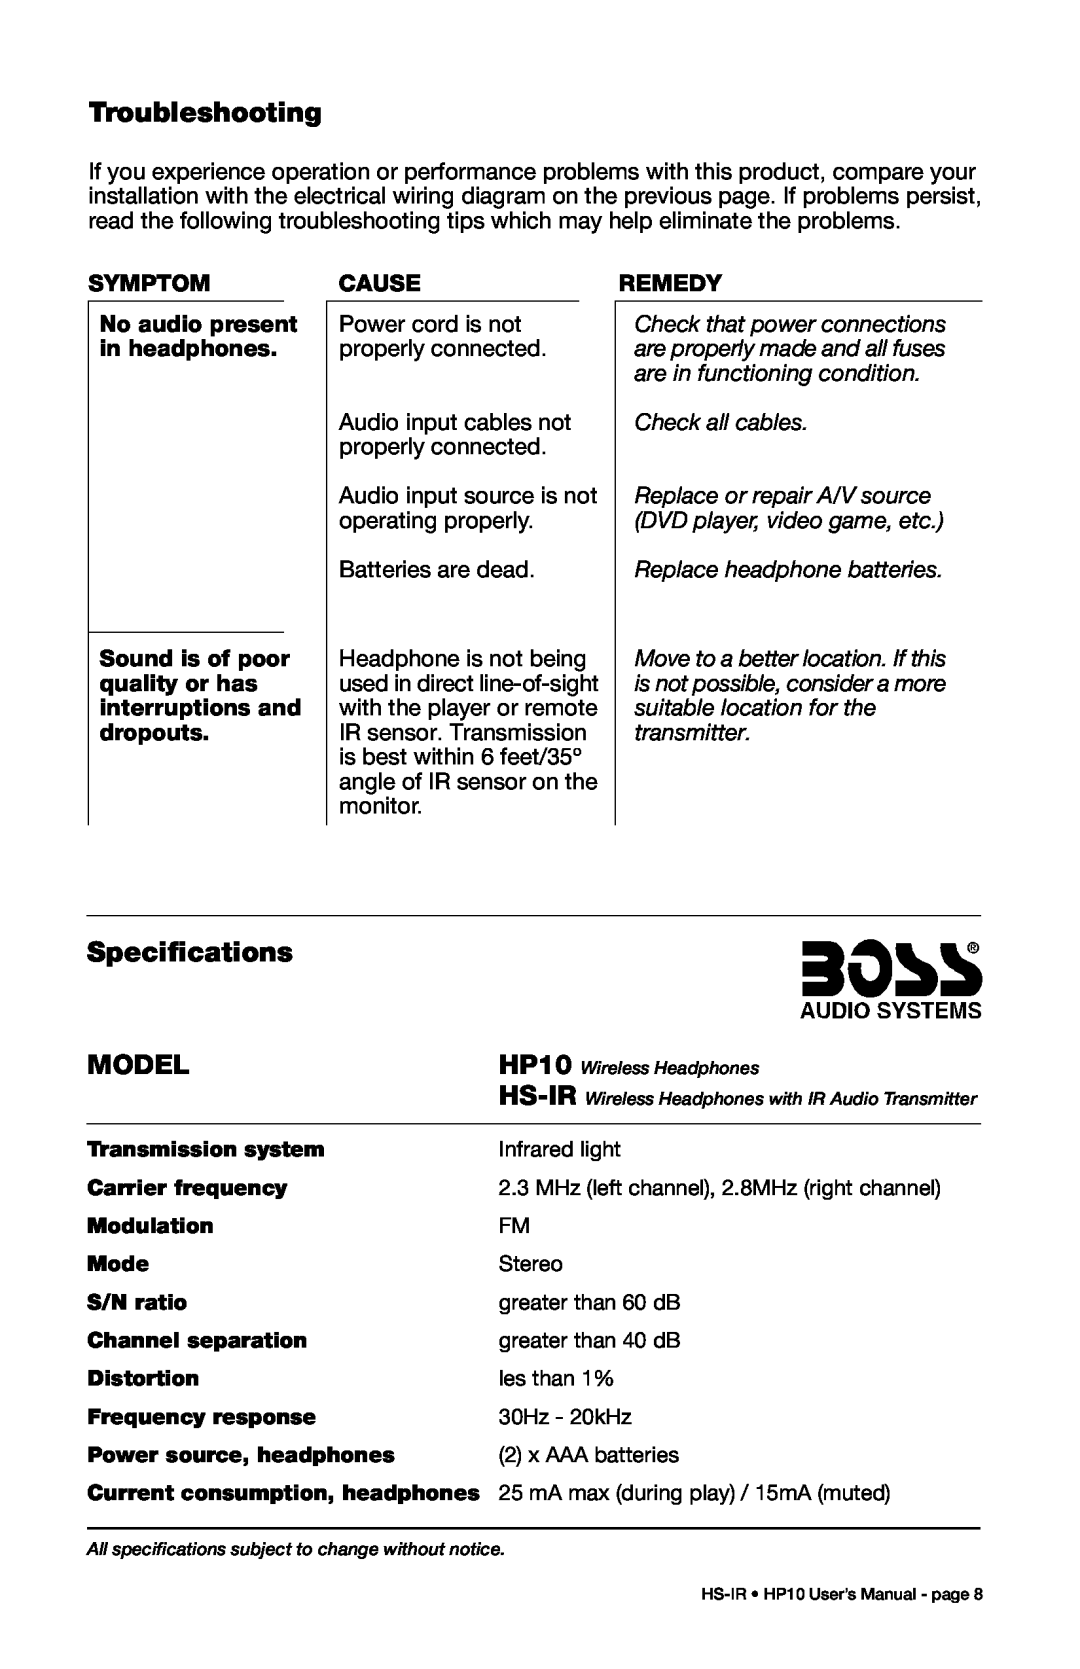 Boss Audio Systems HP-10, HS-IR user manual Troubleshooting, Specifications, Model, HP10, Hs-Ir 